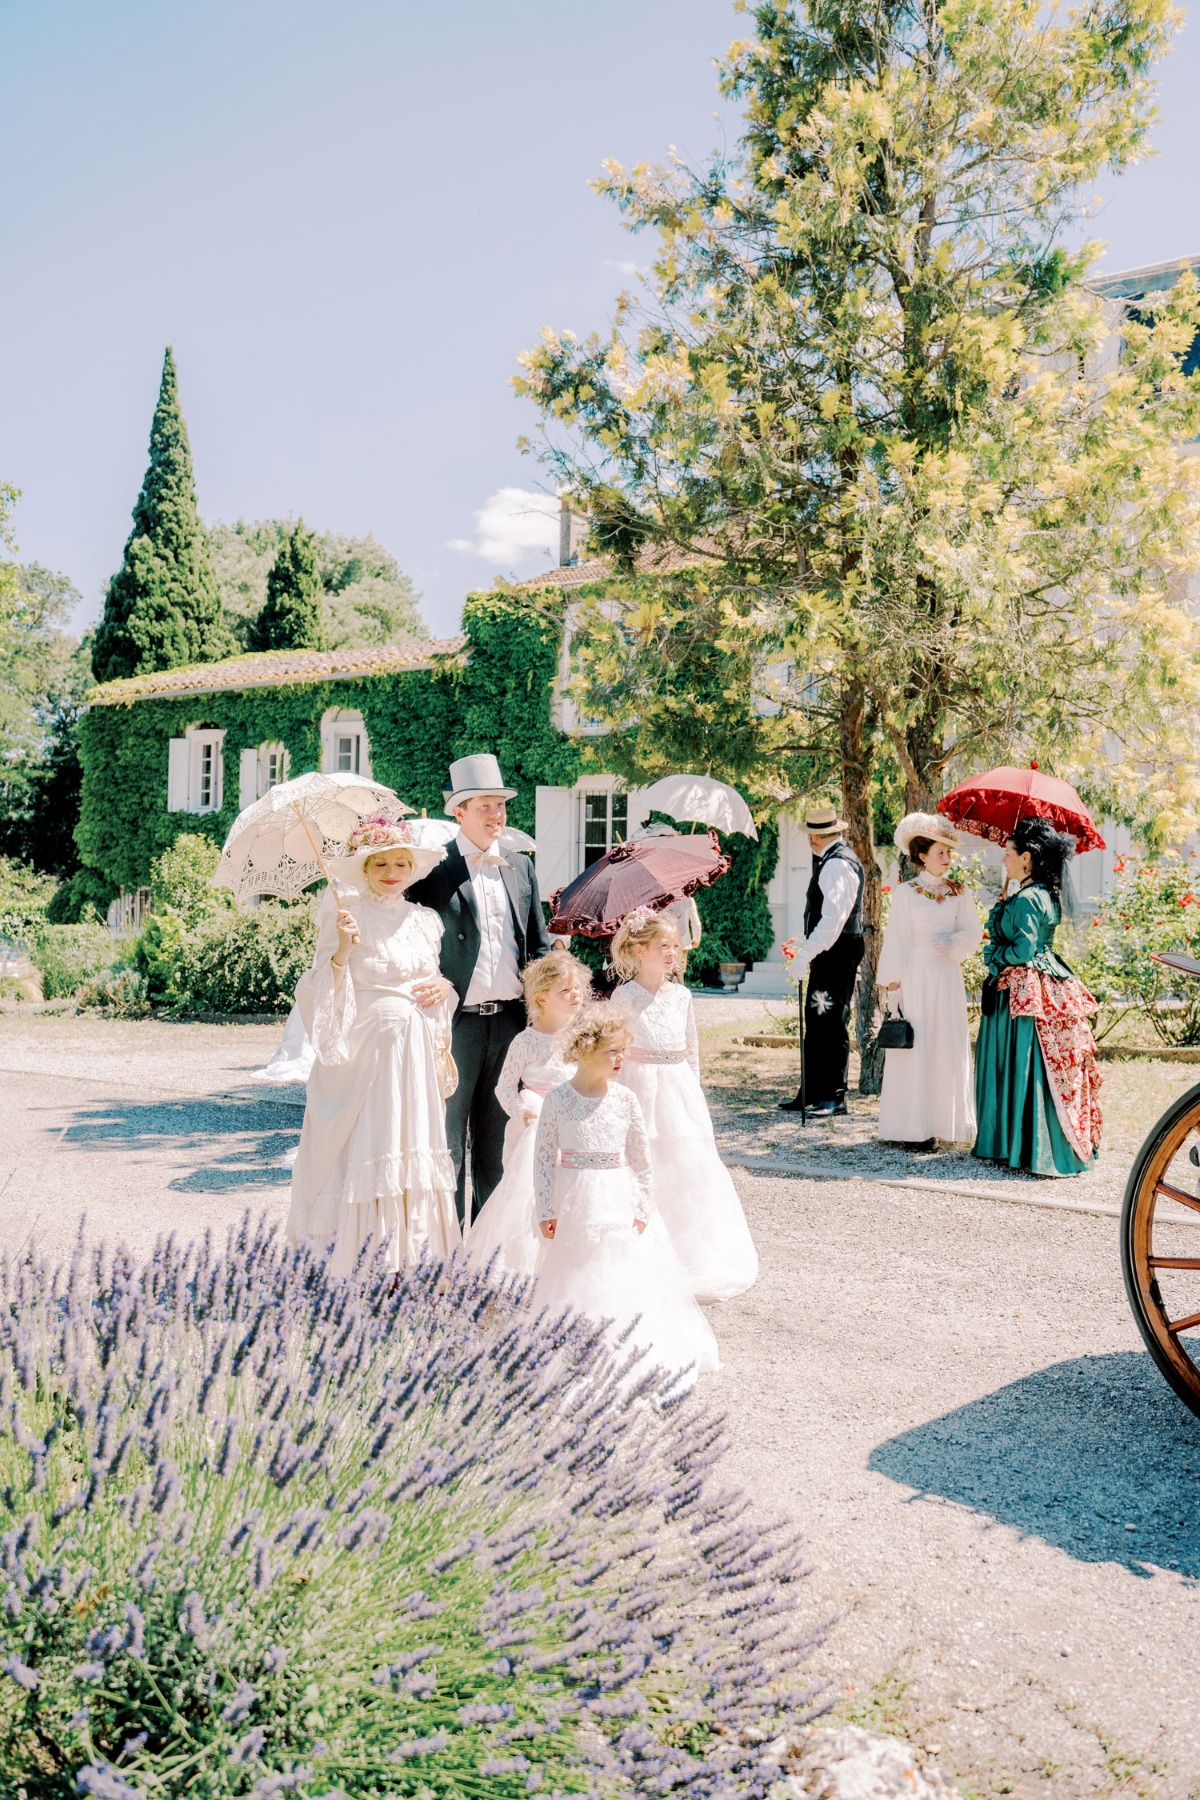 A 19th century chateau garden and wedding party in Occitanie